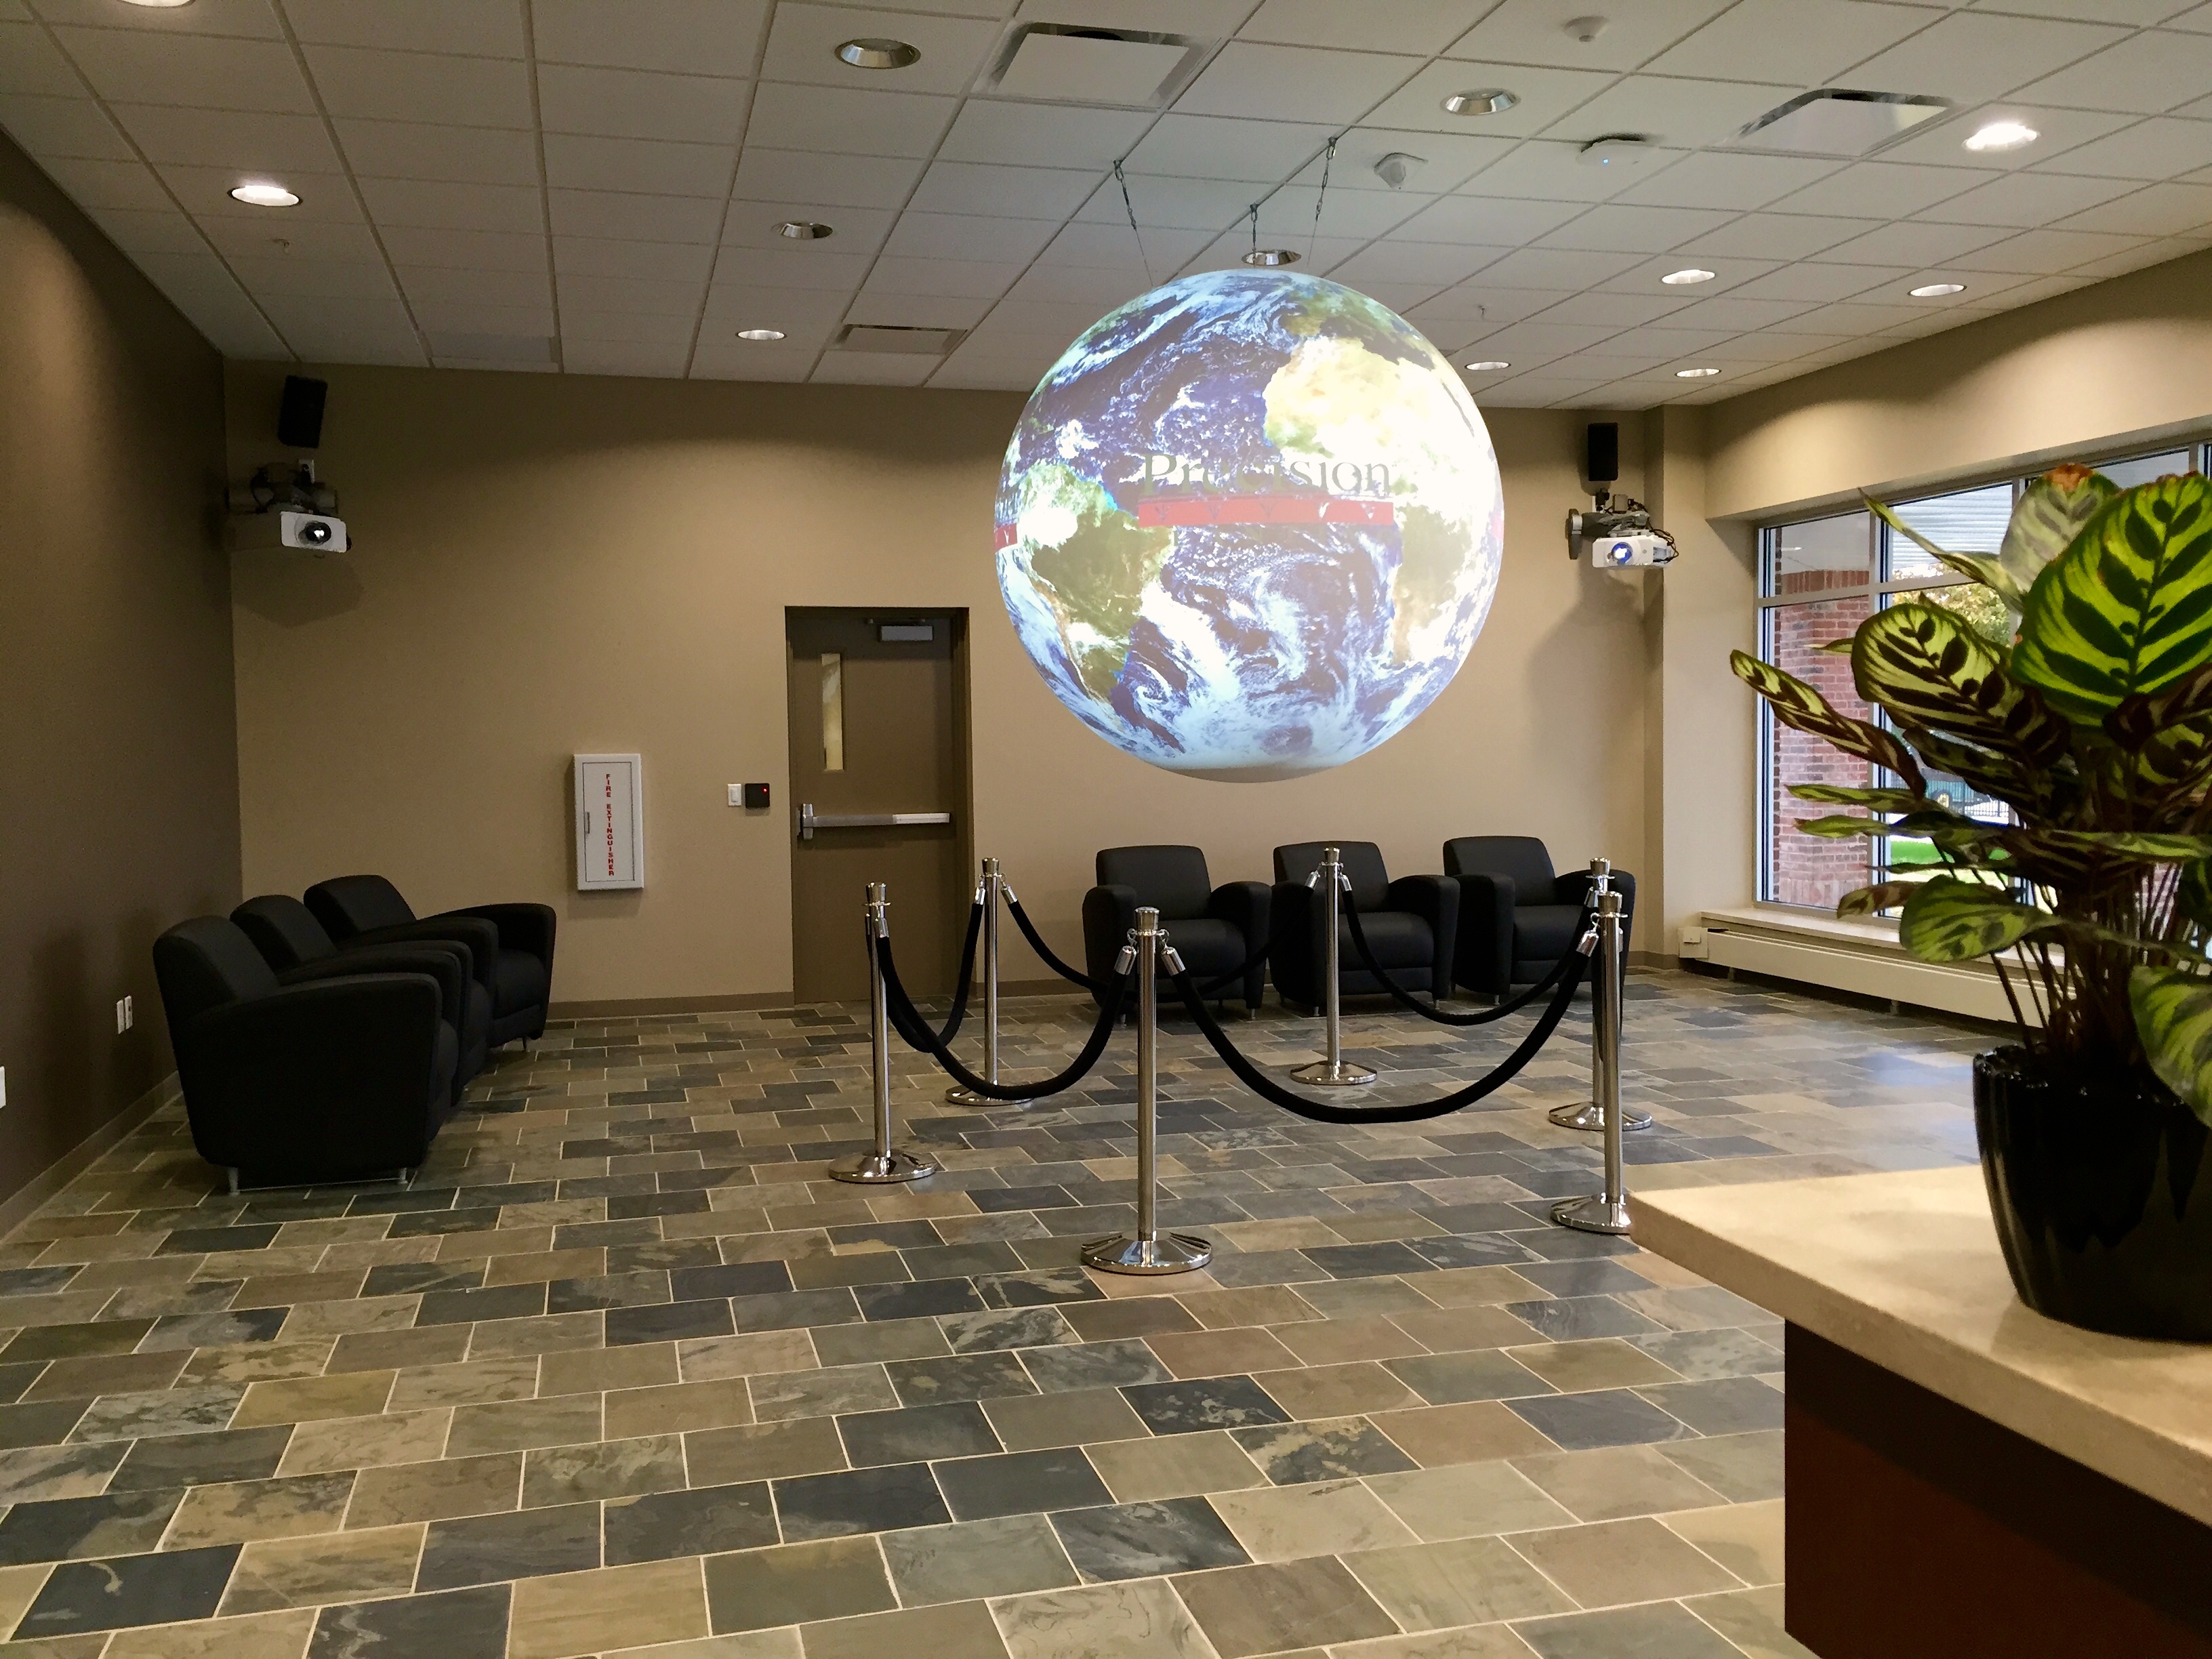 Science On a Sphere hangs in a well-lit lobby displaying the Precision Planting logo over a satellite image of the Earth